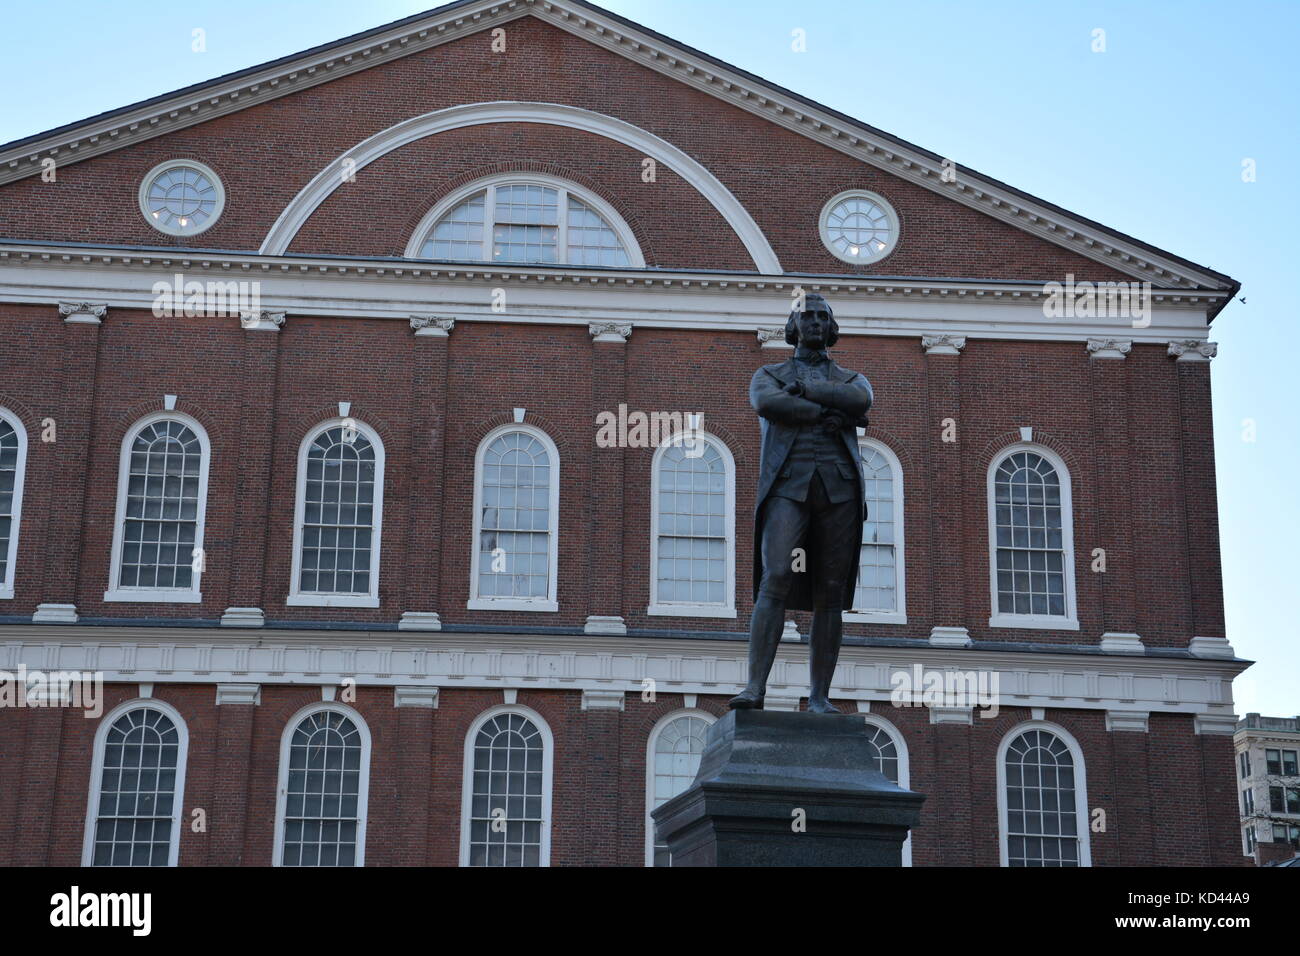 The Samuel Adams memorial statue in front of Faneuil Hall in downtown Boston Stock Photo